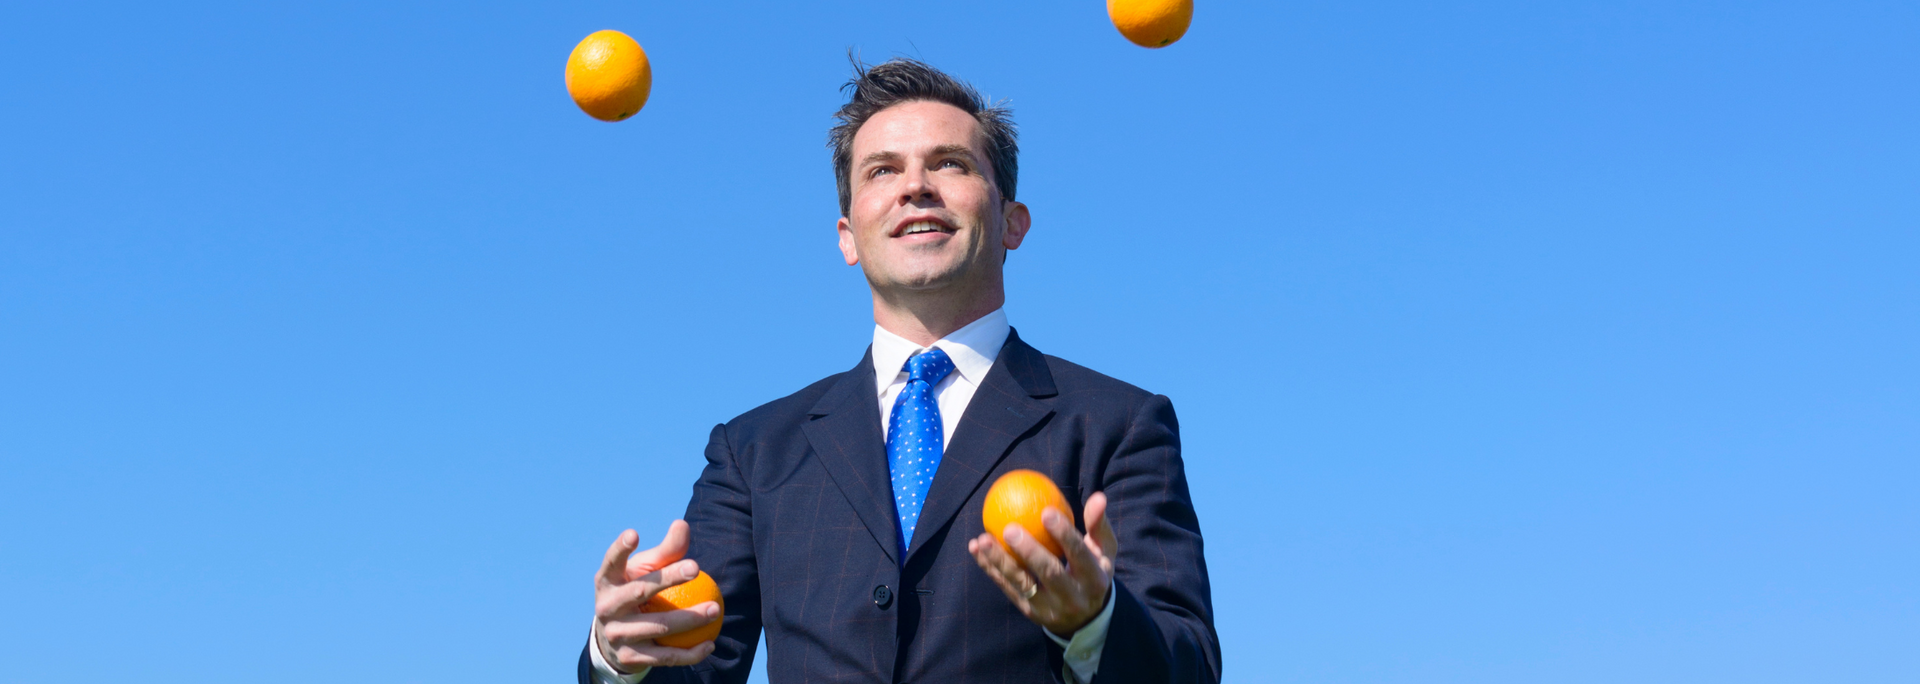 Picture of a businessperson juggling